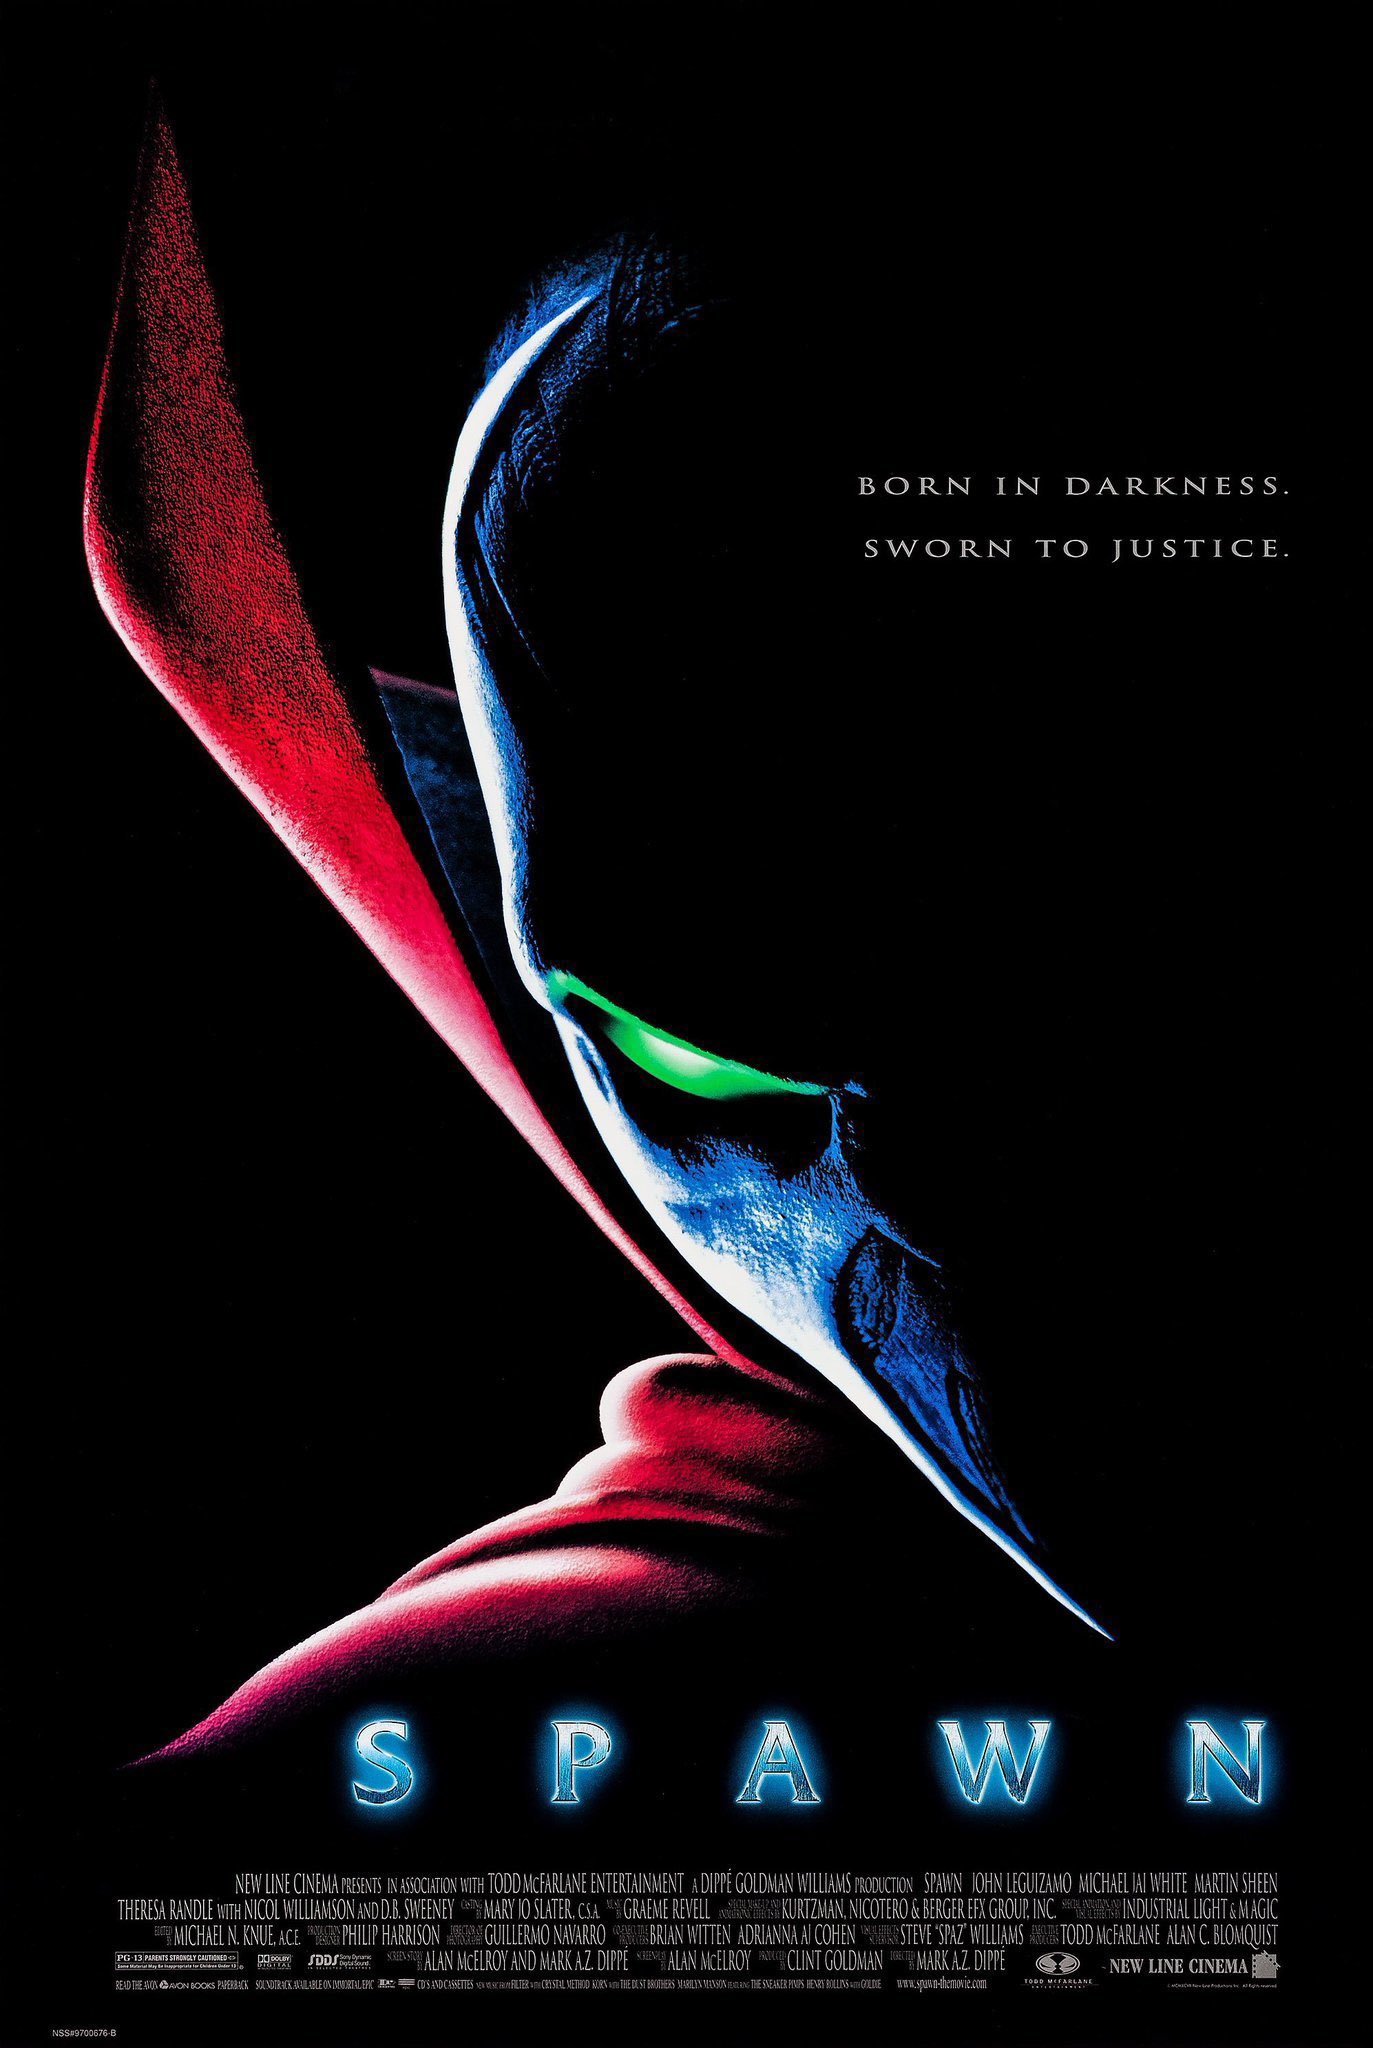 'Spawn’ premiered in theaters 27 years ago 🍿⛓️💚  August 1, 1997